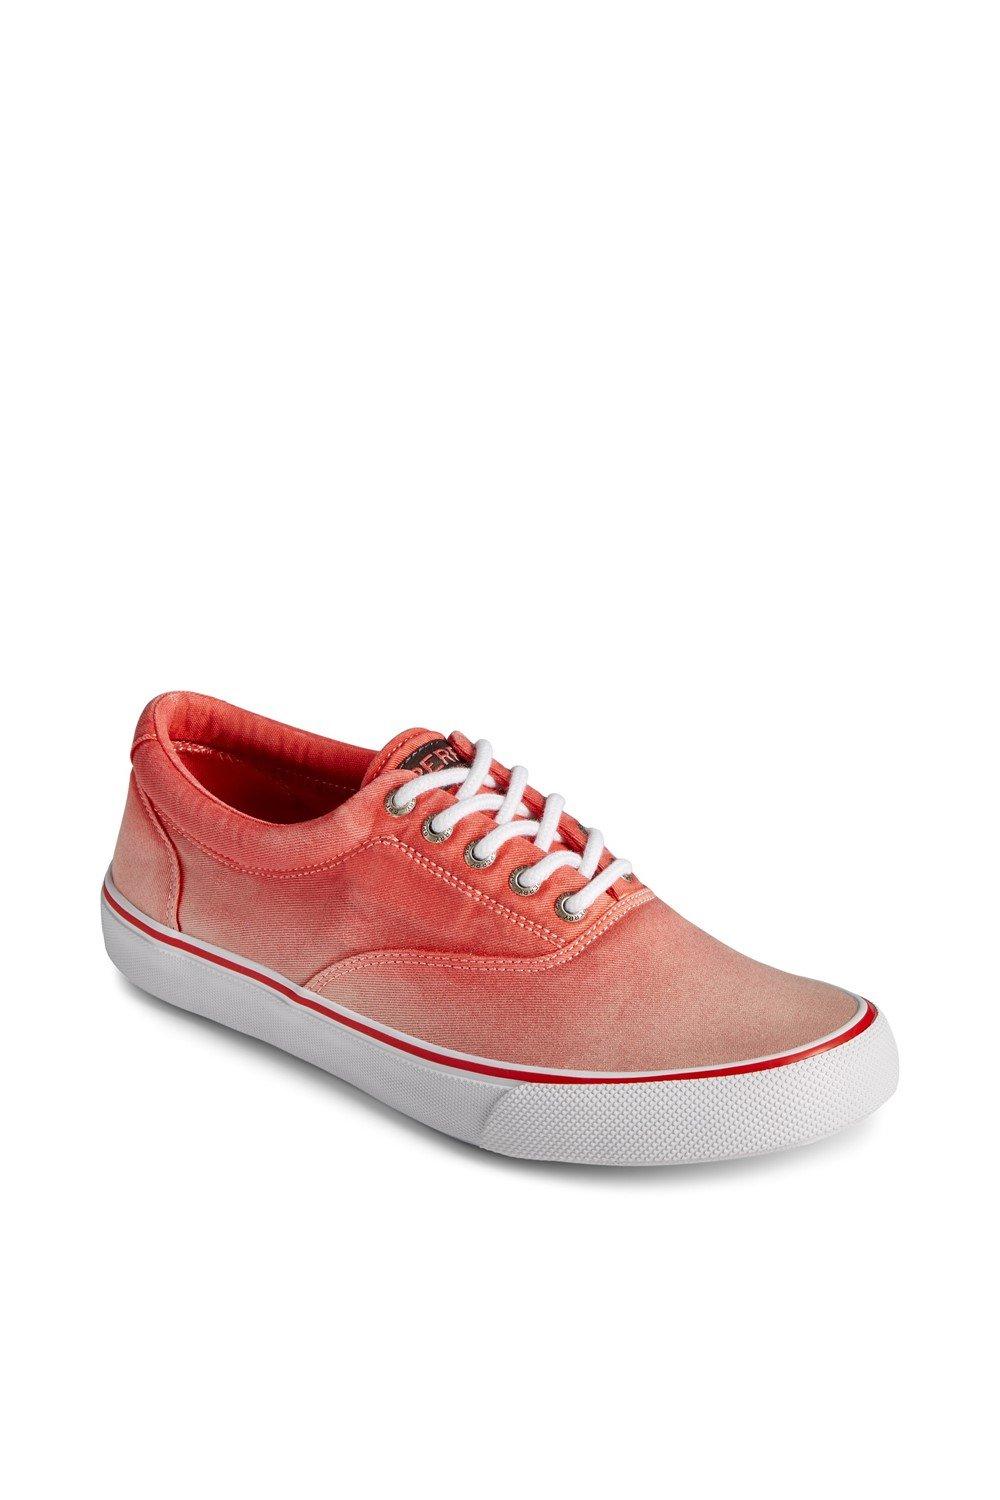 Shoes | 'Striper II CVO Ombre' Twill Lace Shoes | Sperry